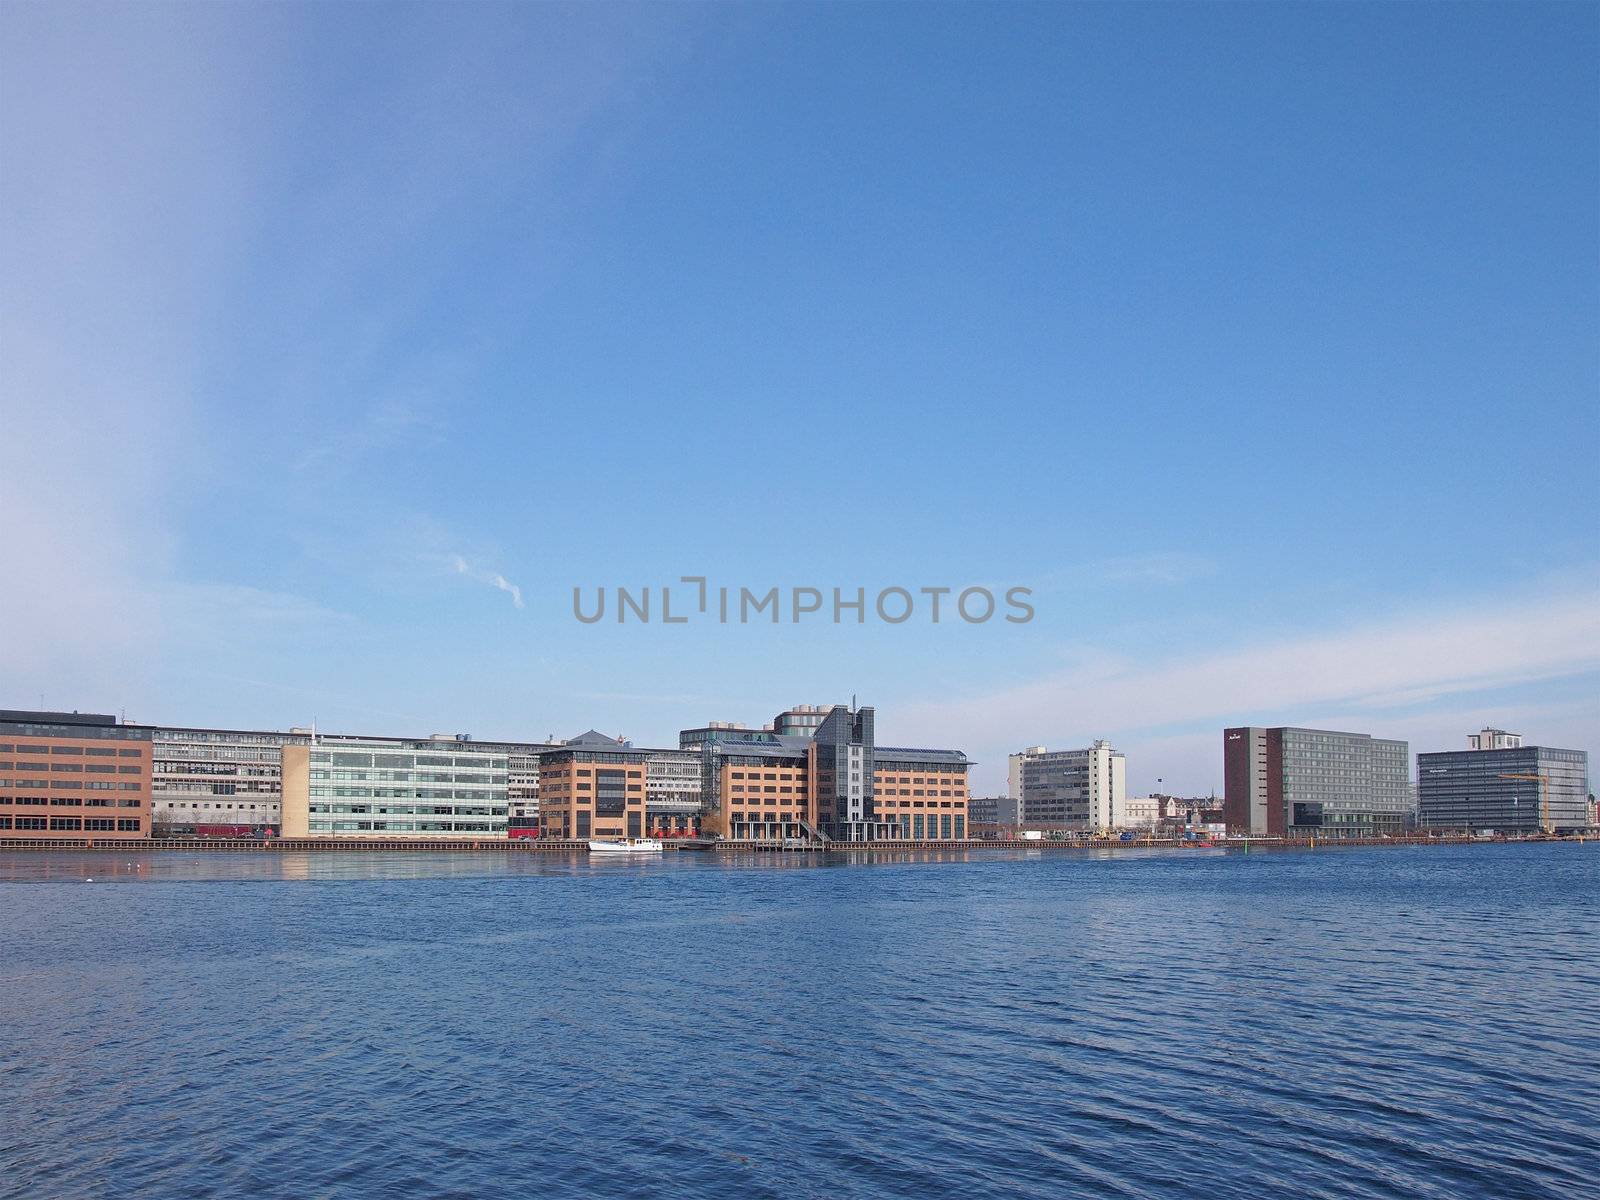 COPENHAGEN - MAR 16: View of modern commercial and business buildings across the canal in Central Copenhagen, Denmark on March 16, 2013.
